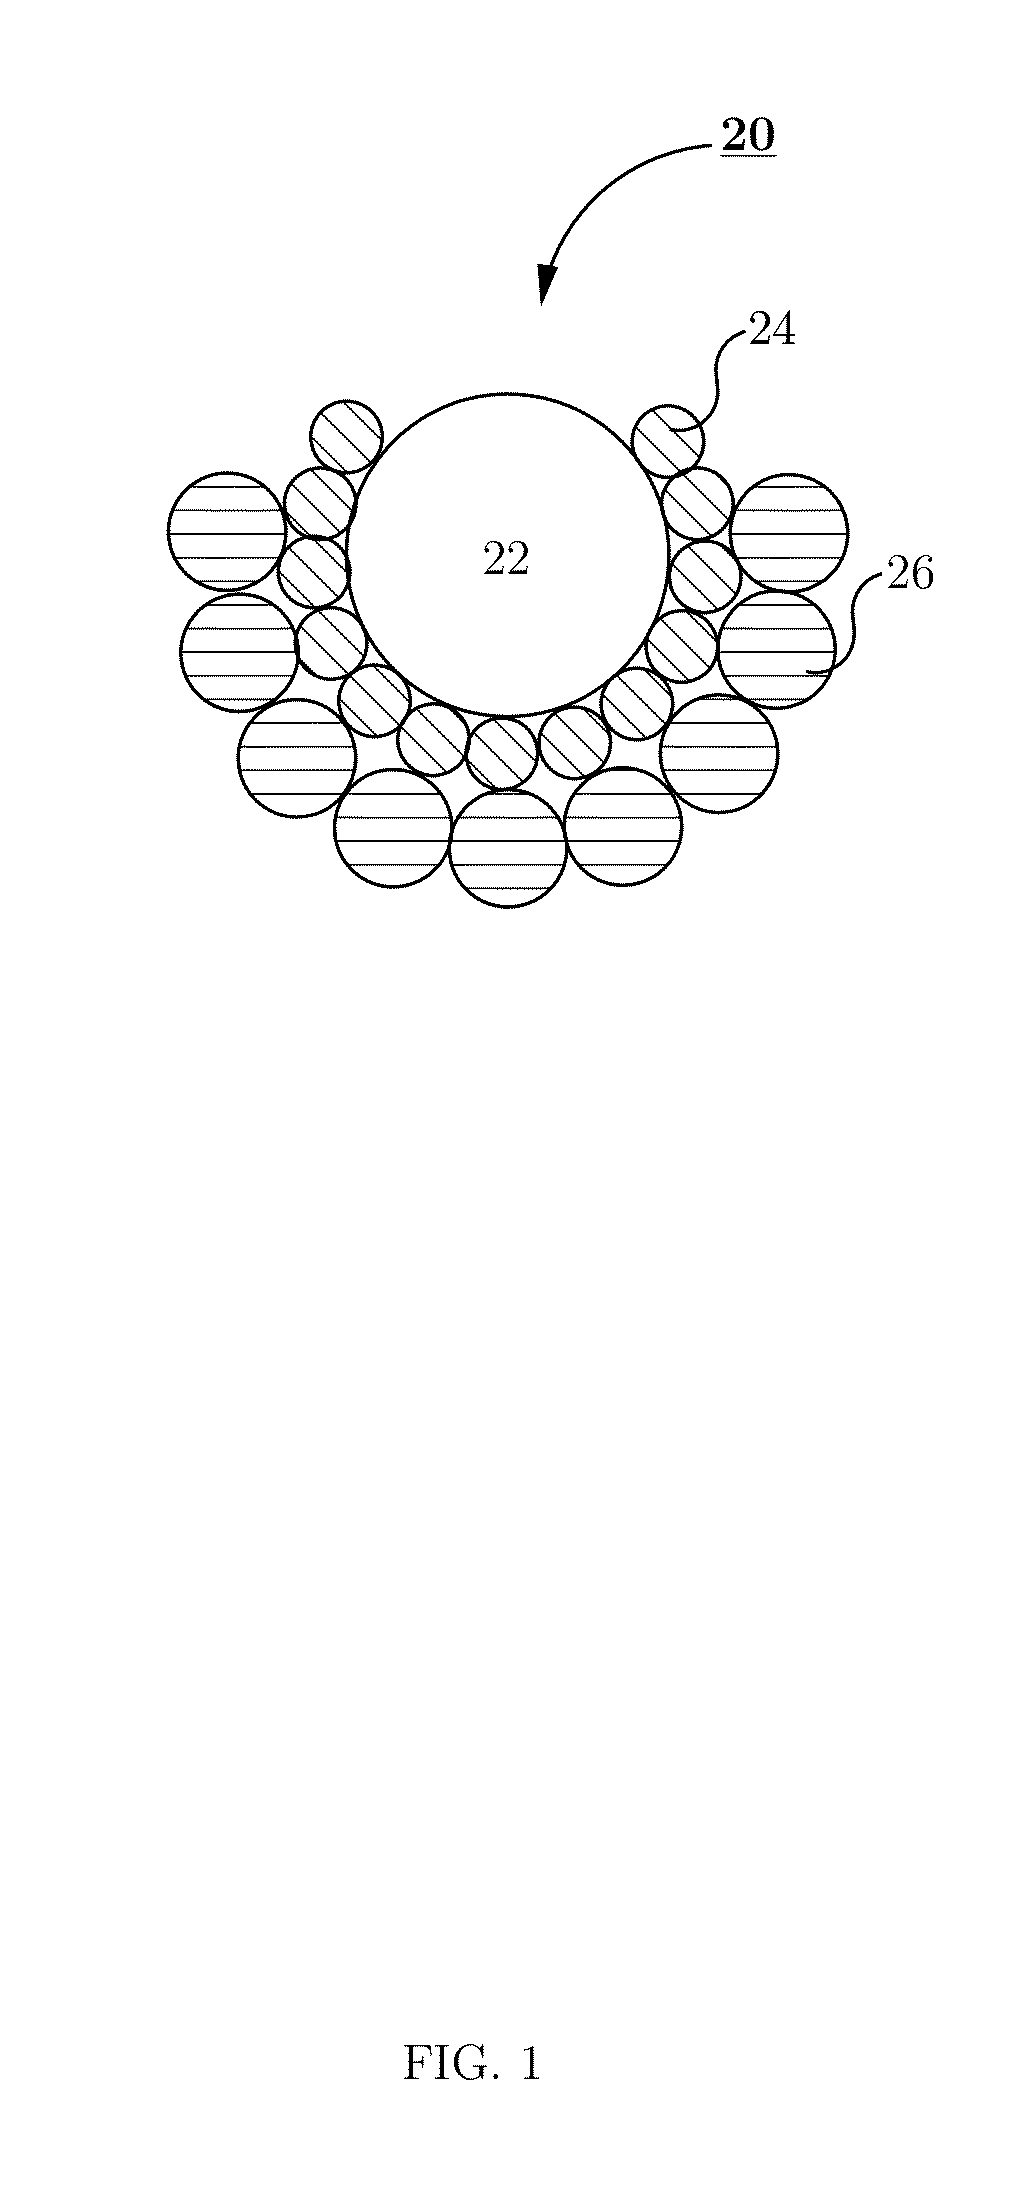 Dyed textiles and method of producing the same